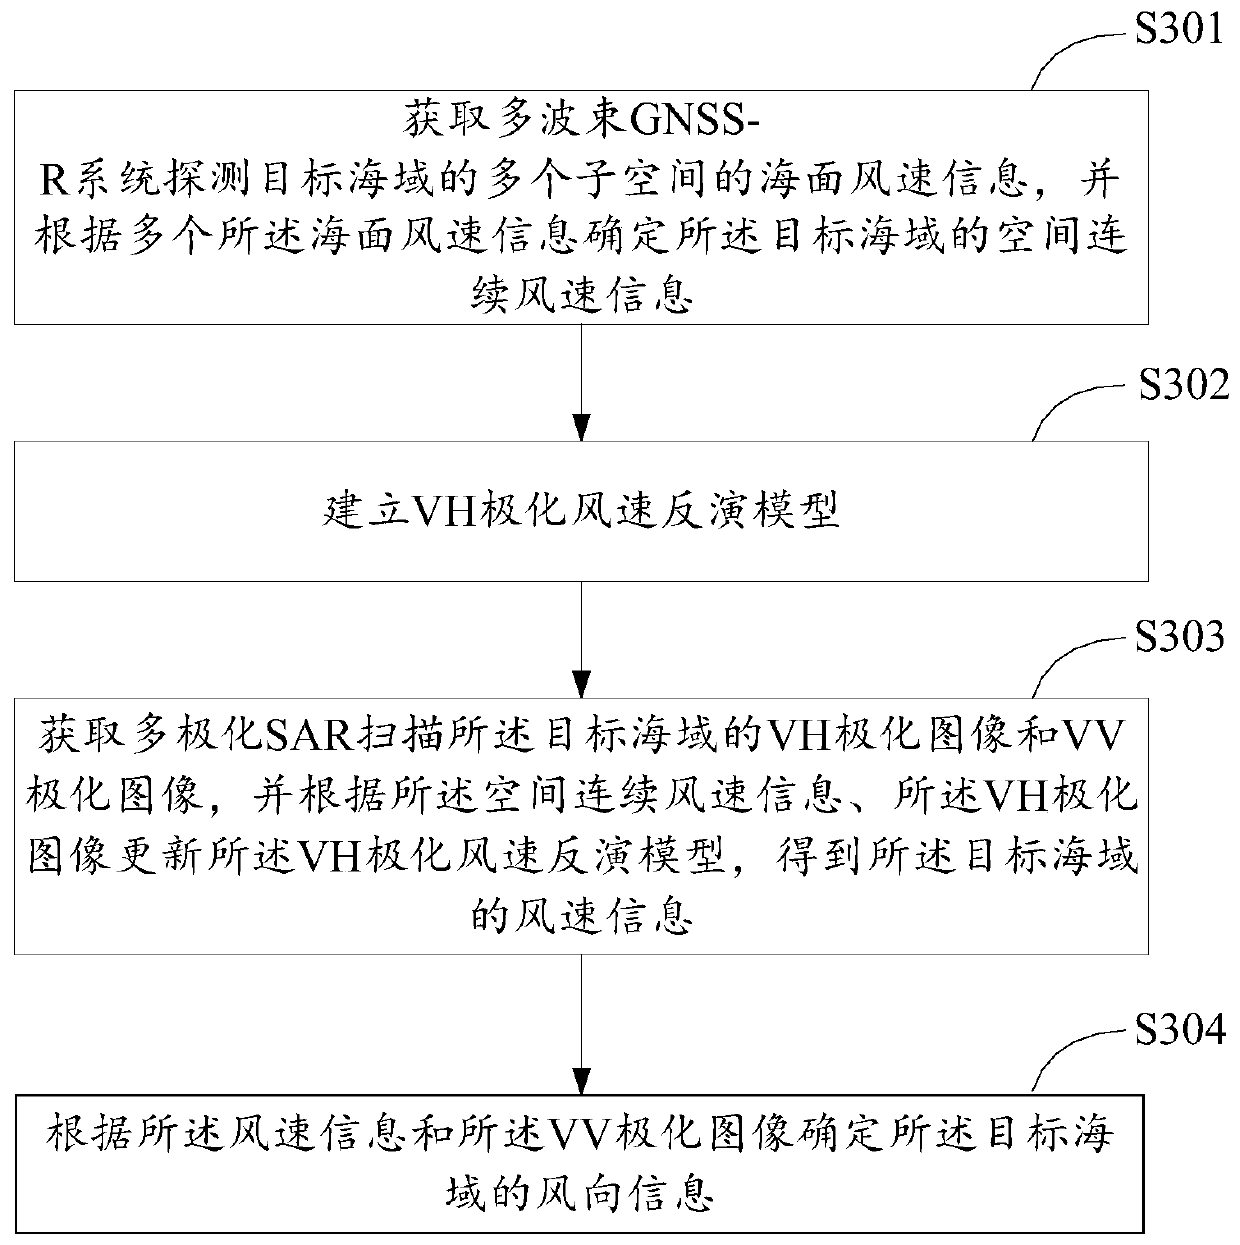 Multi-beam GNSS-R system, sea surface wind field inversion method and prediction method